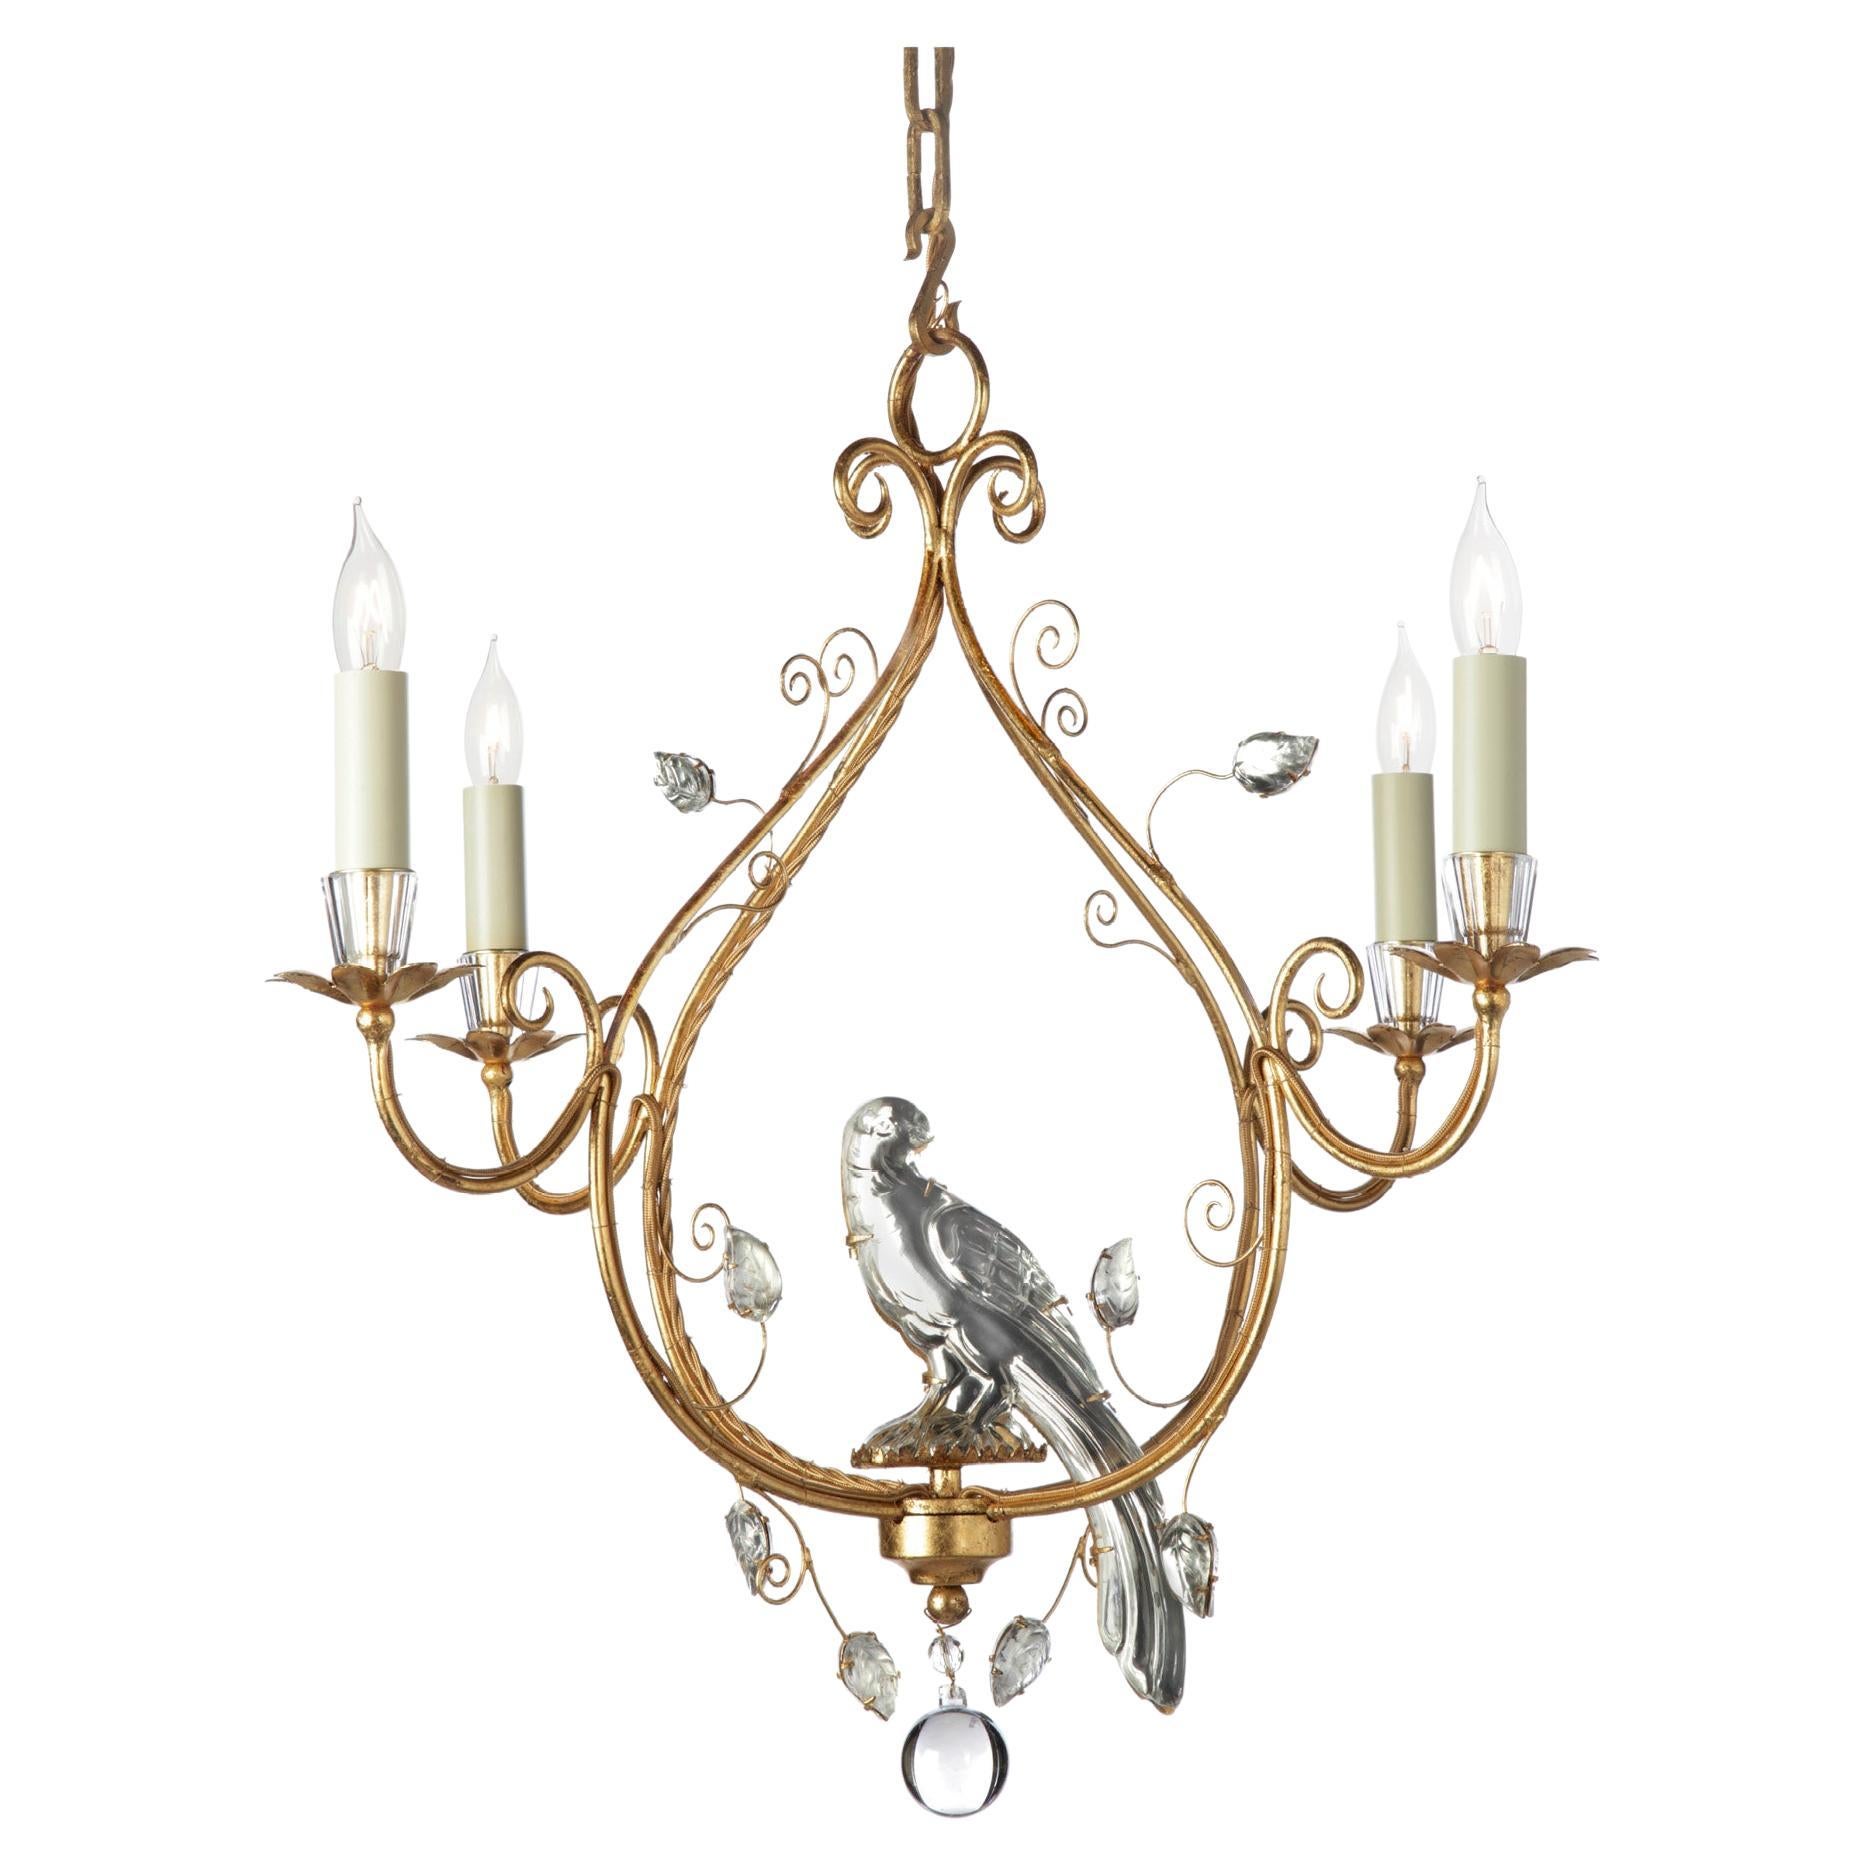 Certified Maison Bagues  Chandelier, 4 Lights Iron & Crystal #18104 For Sale